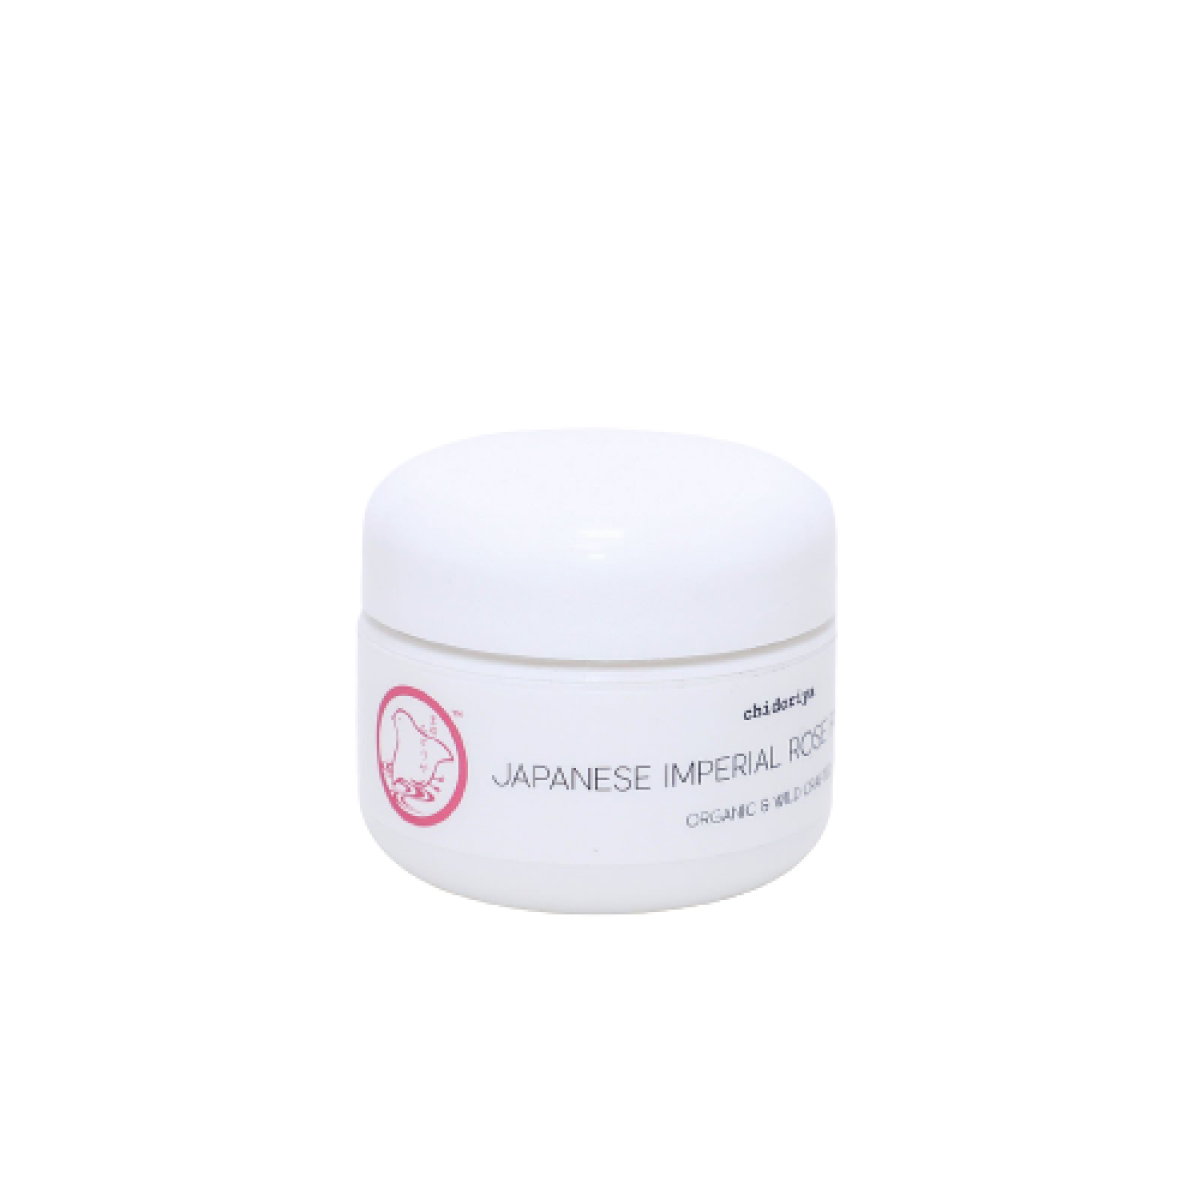 Primary Image of Japanese Imperial Rose Face Cream